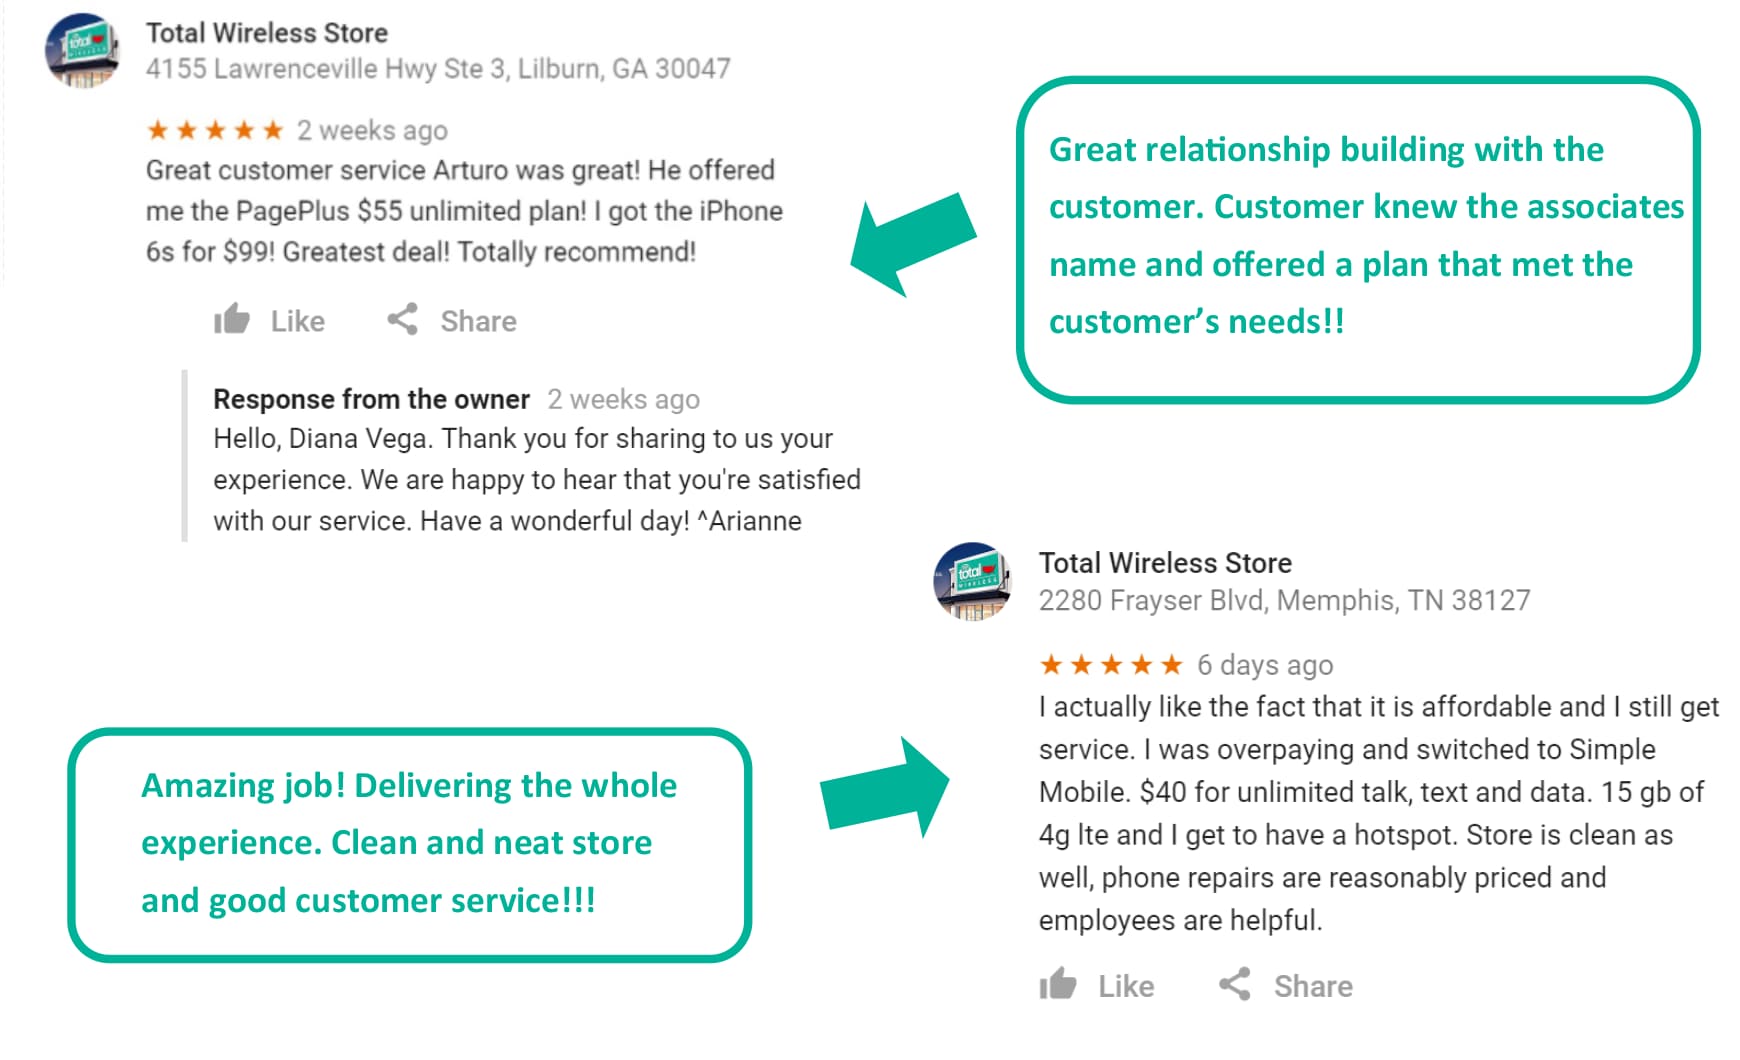 Contact us with your feedback at exclusiveretailer@tracfone.com